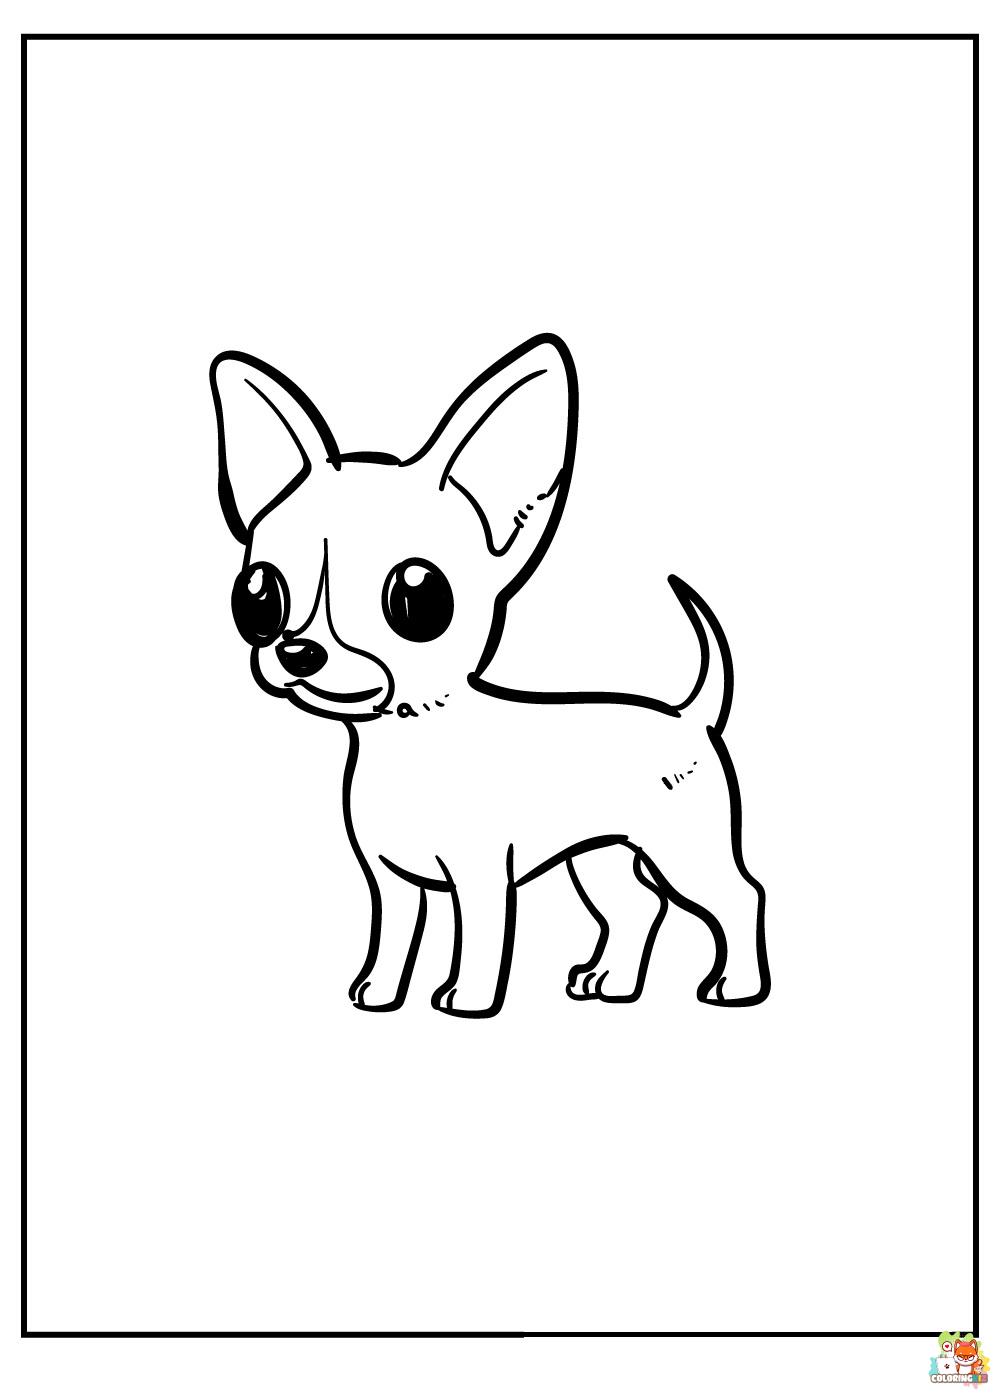 Pomeranian and Chihuahua Coloring Pages 7